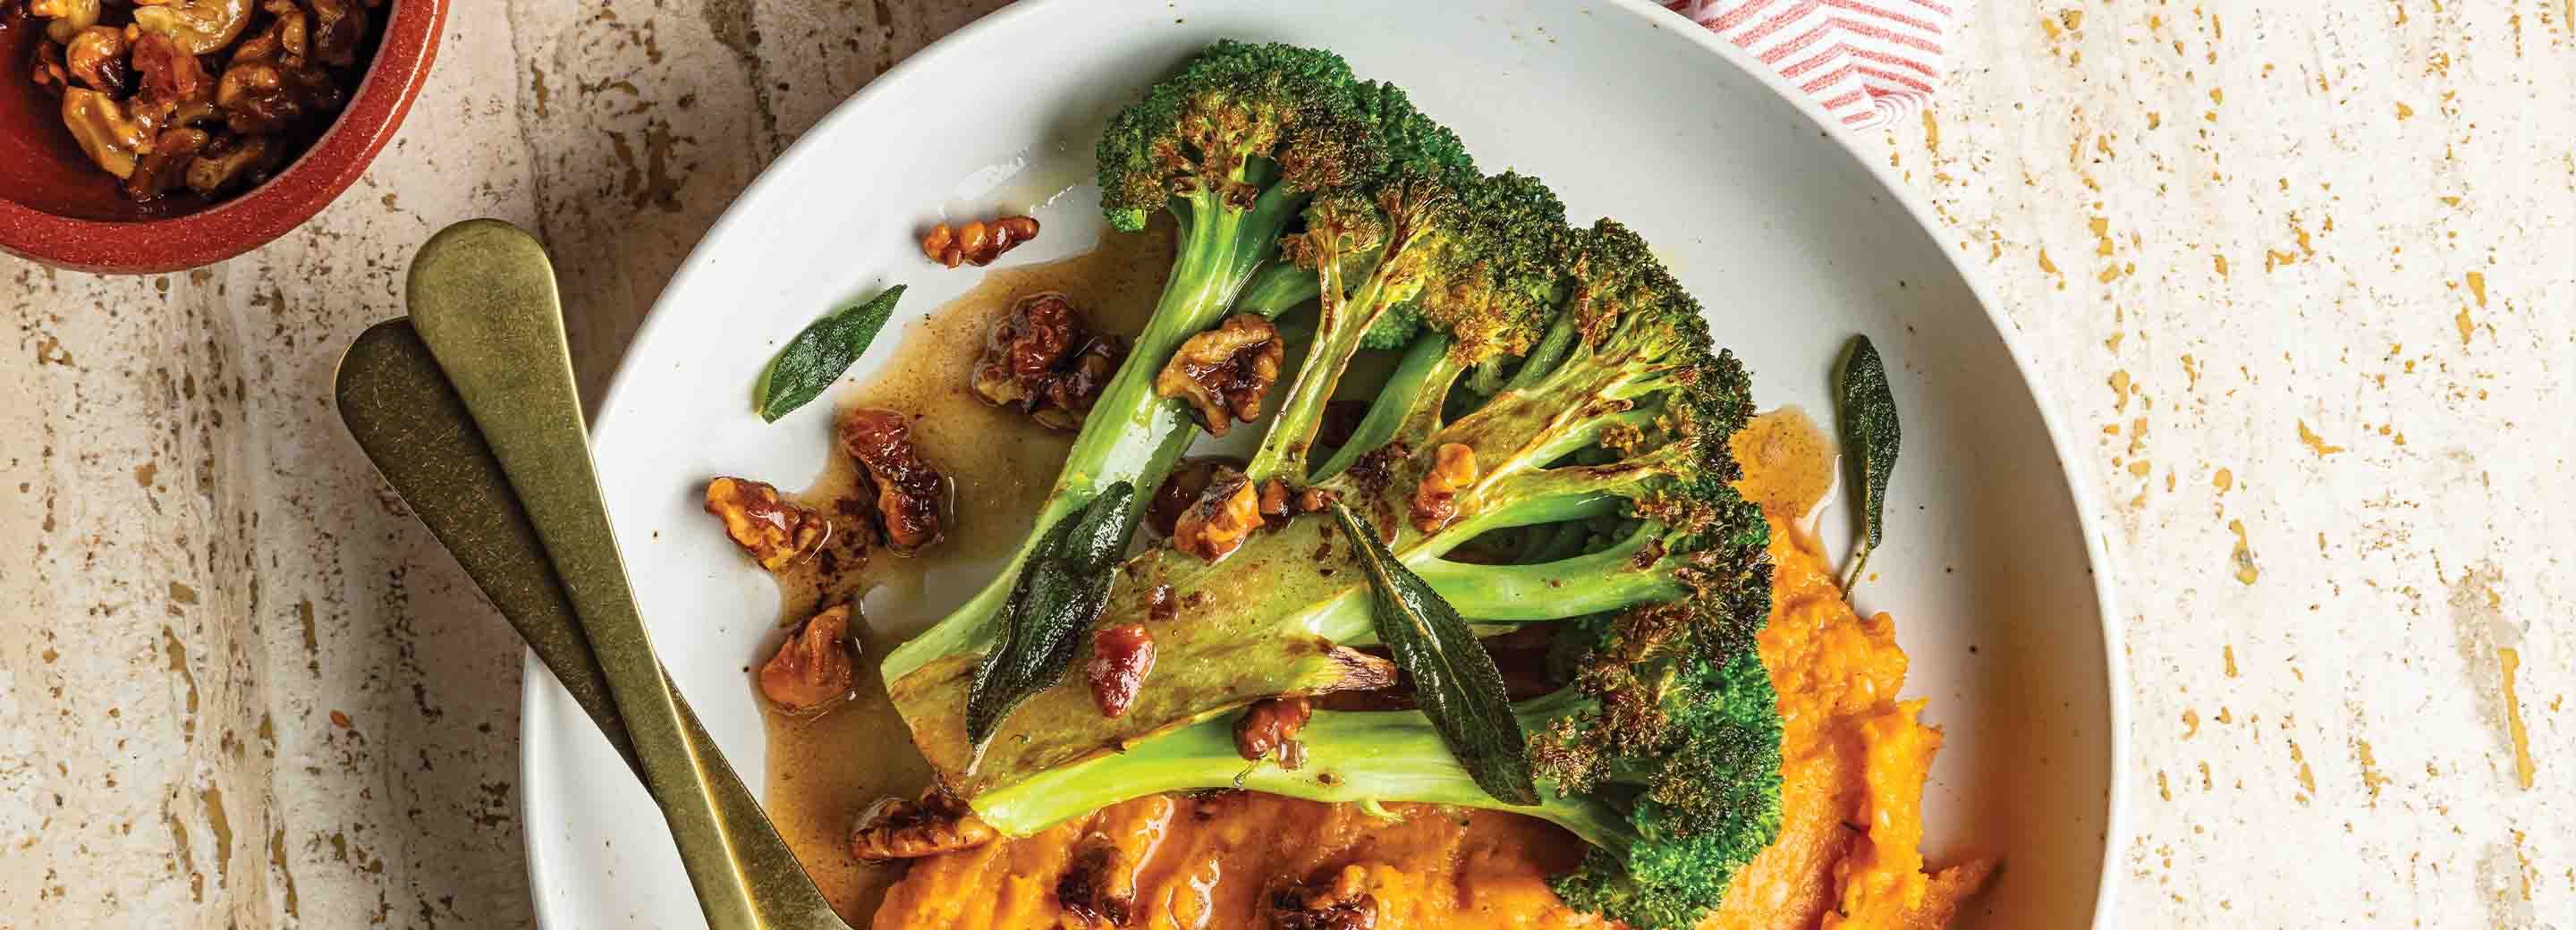 Brown Butter Broccoli Steaks with Sweet Potato Mash